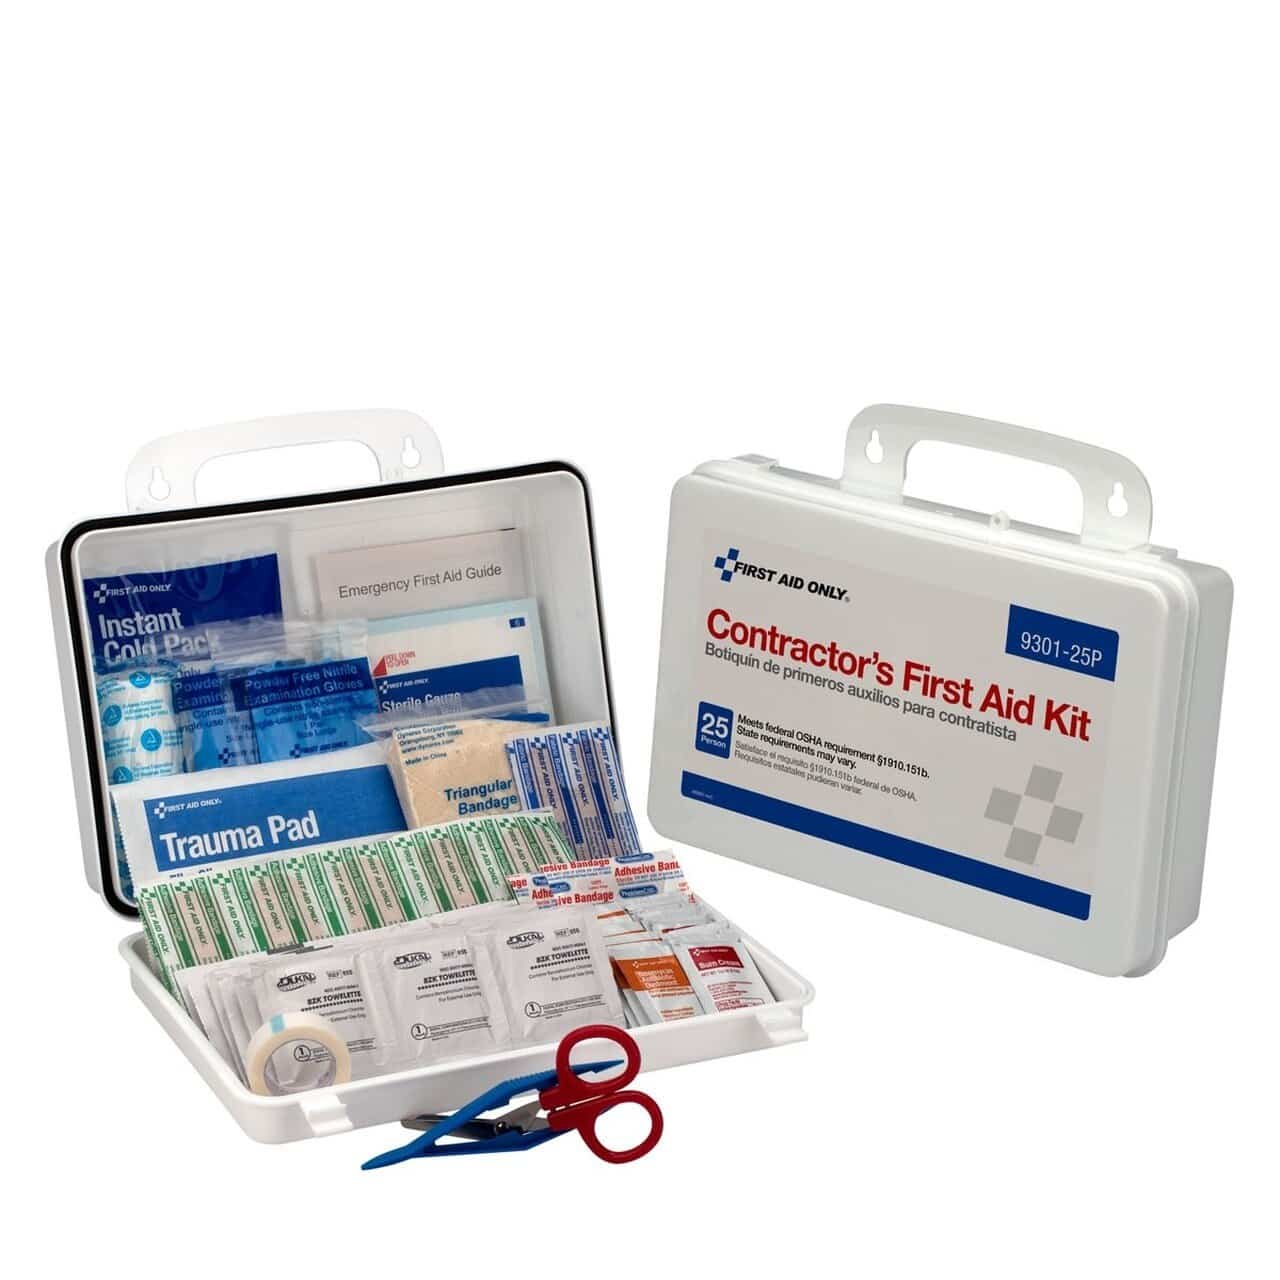 American Ladders & Scaffolds, Contractor's First Aid Kit (25 person)